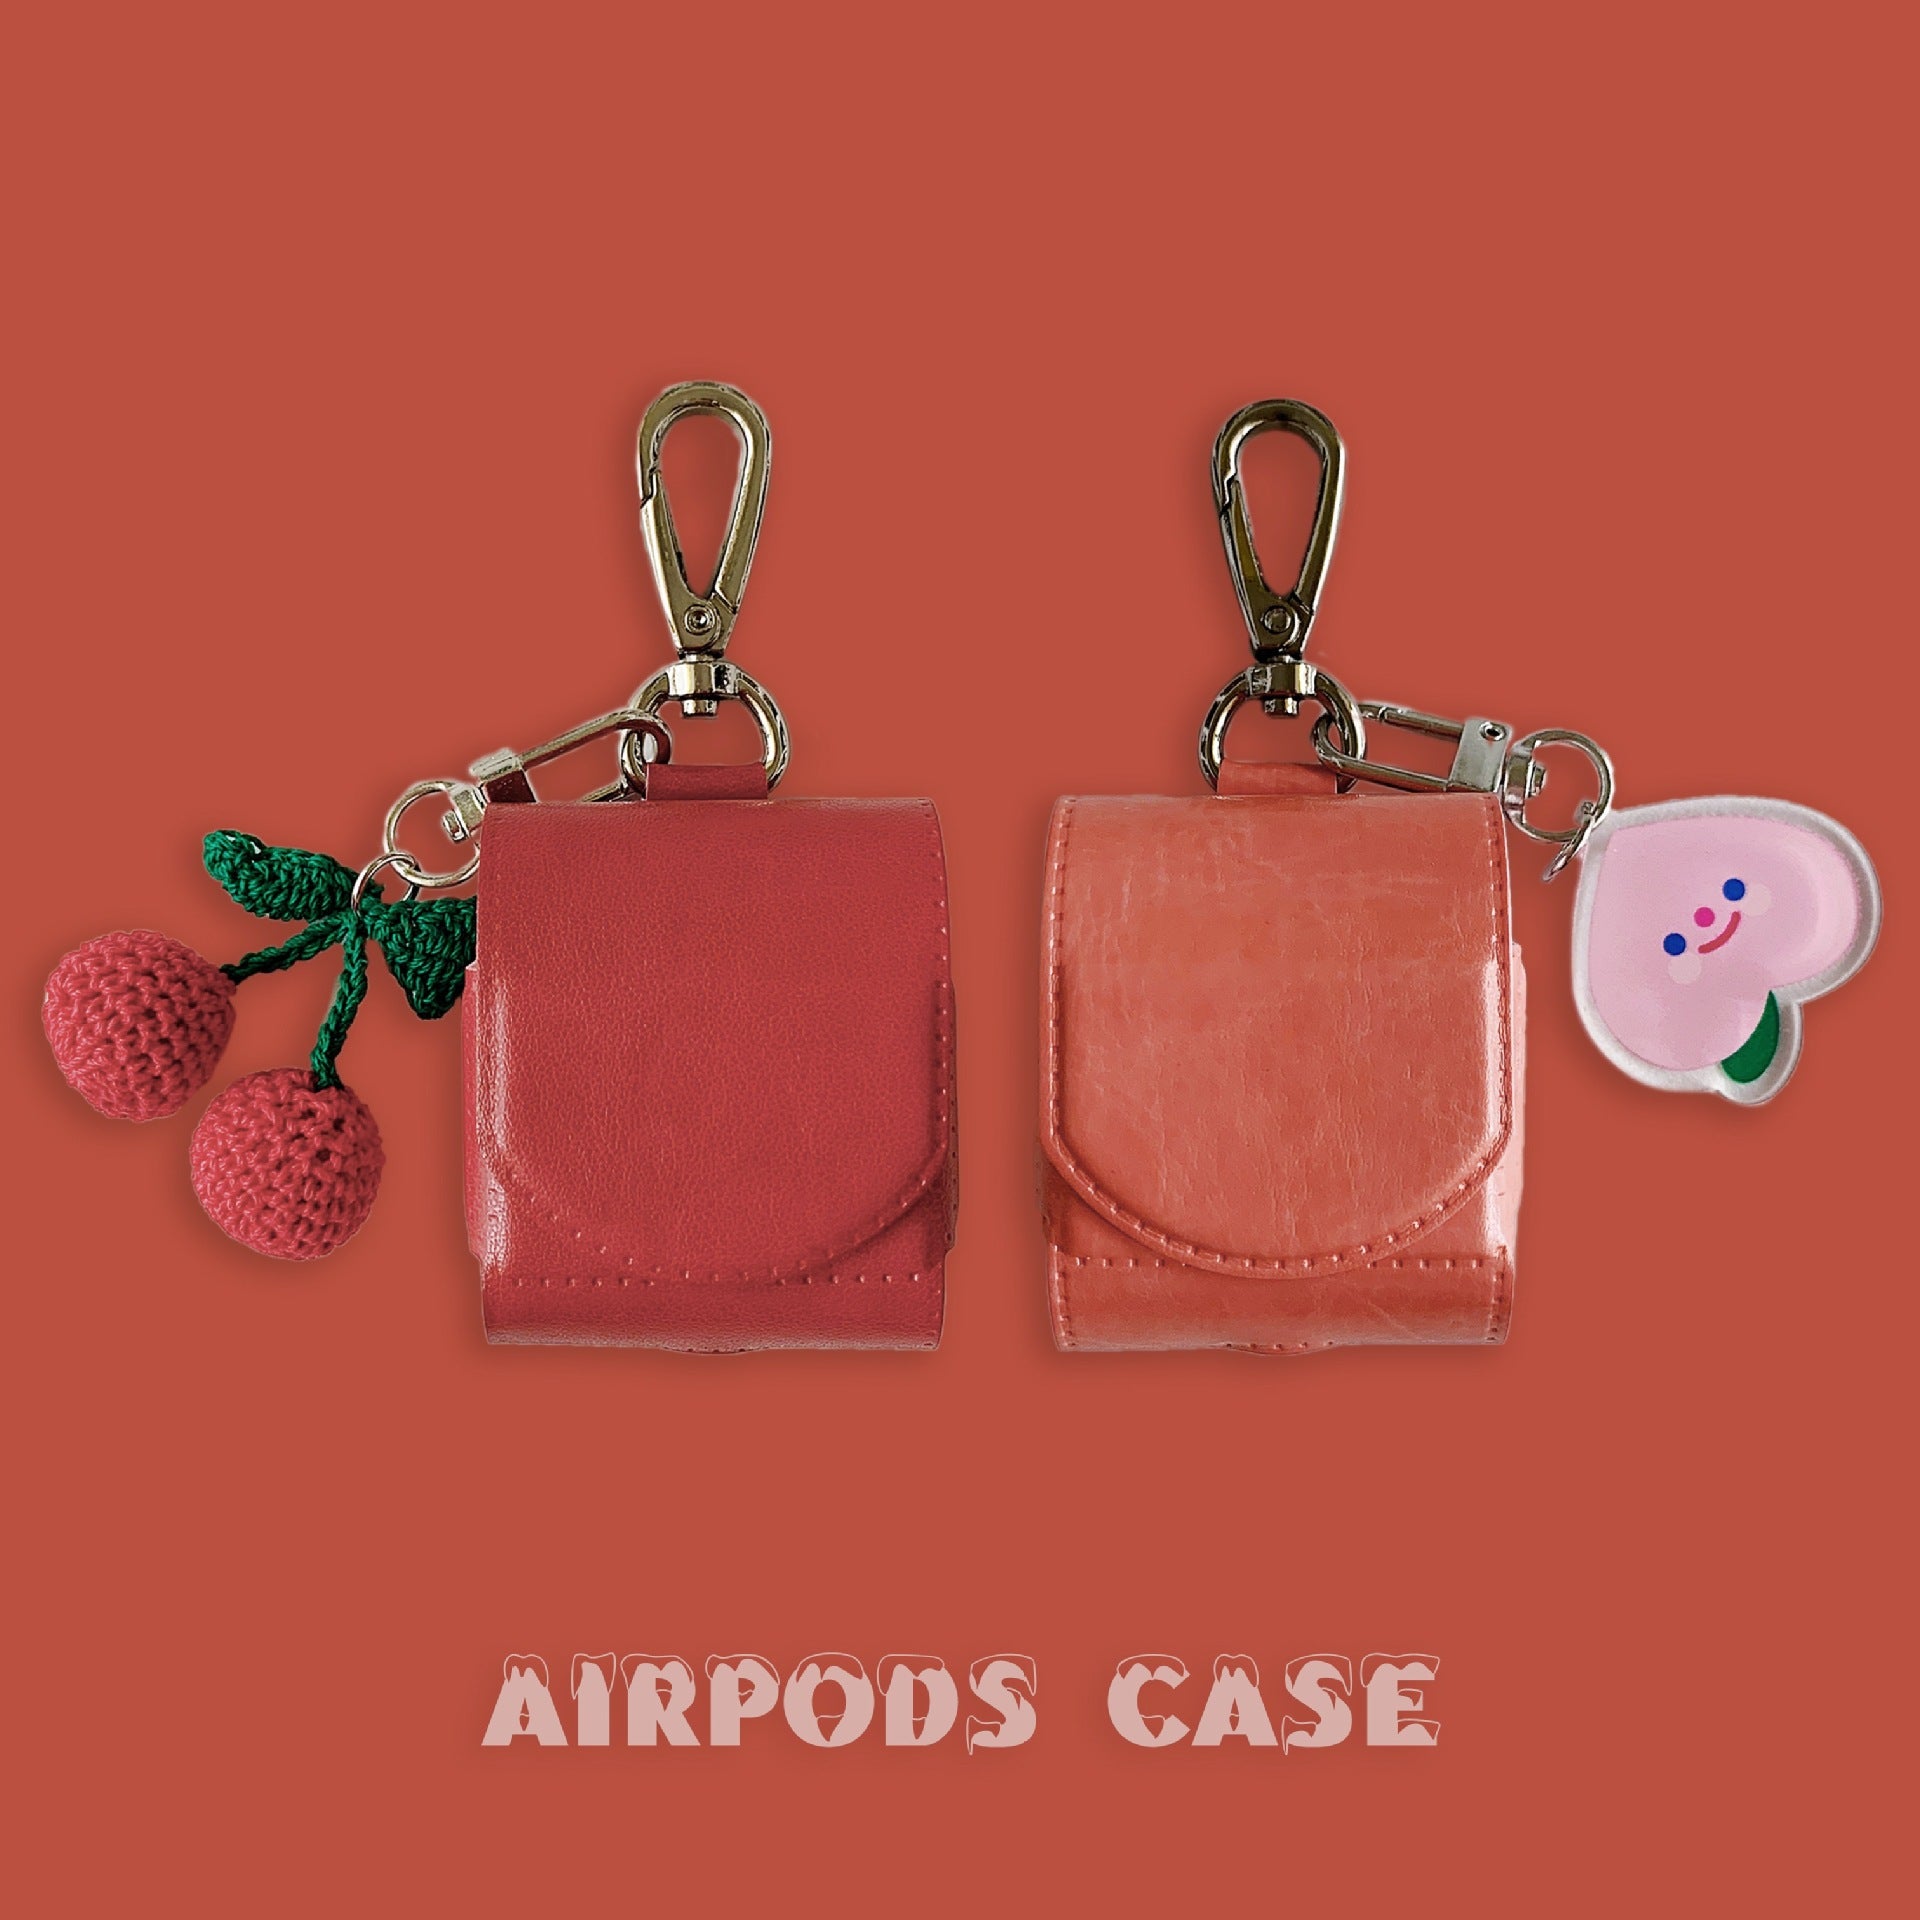 Luxury Leather Bags Airpod Cases